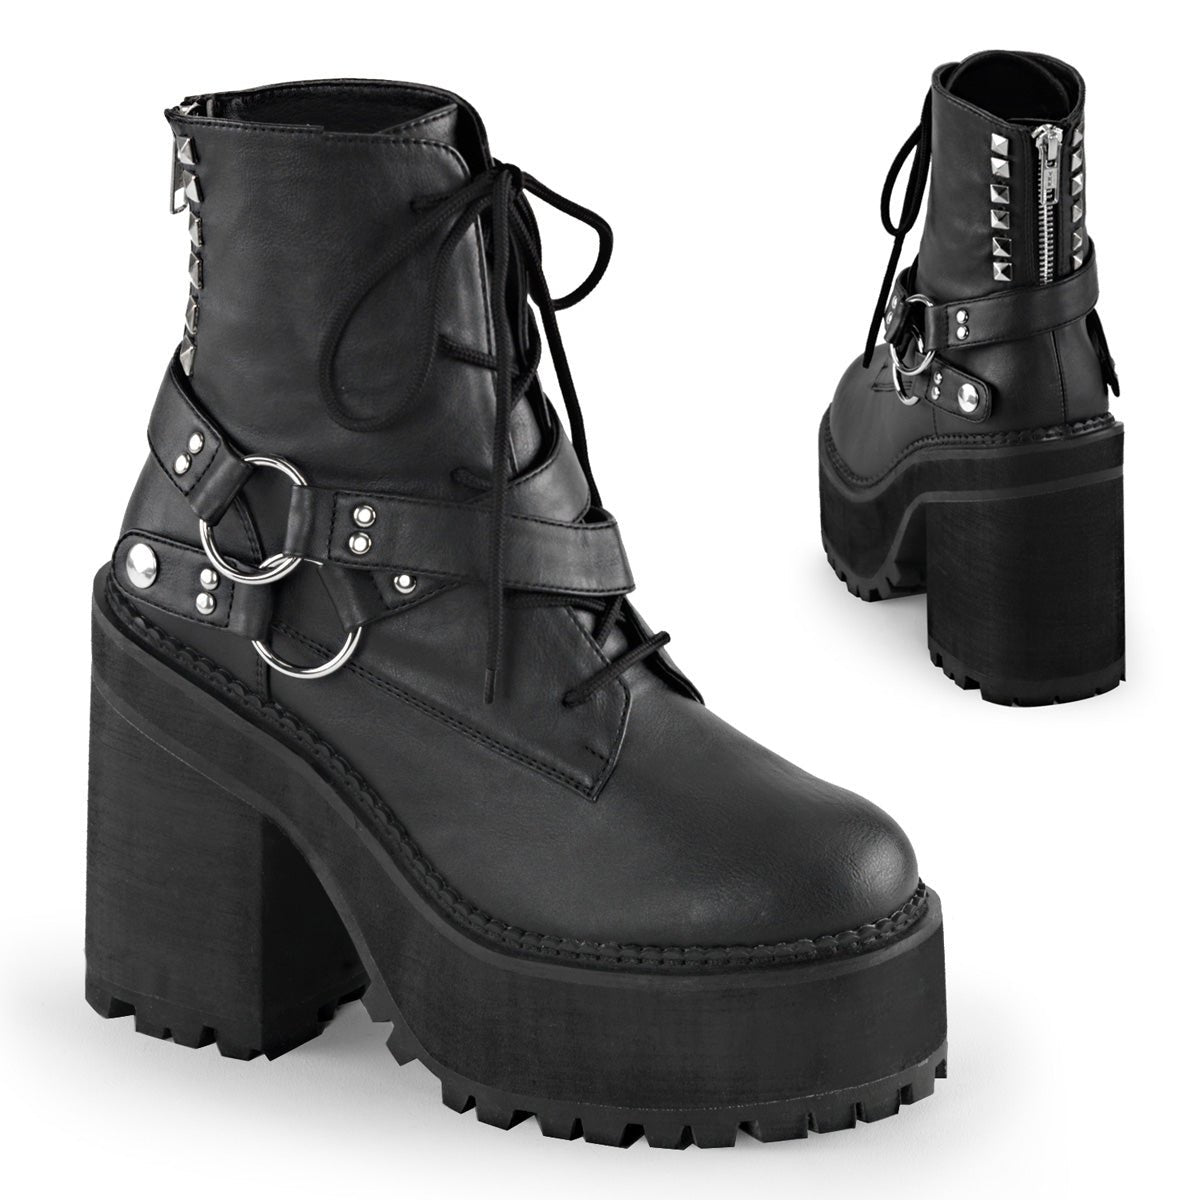 DemoniaCult ASSAULT 101 Platform Boots,Front Lace Boots - From DemoniaCult Sold By Alternative Footwear